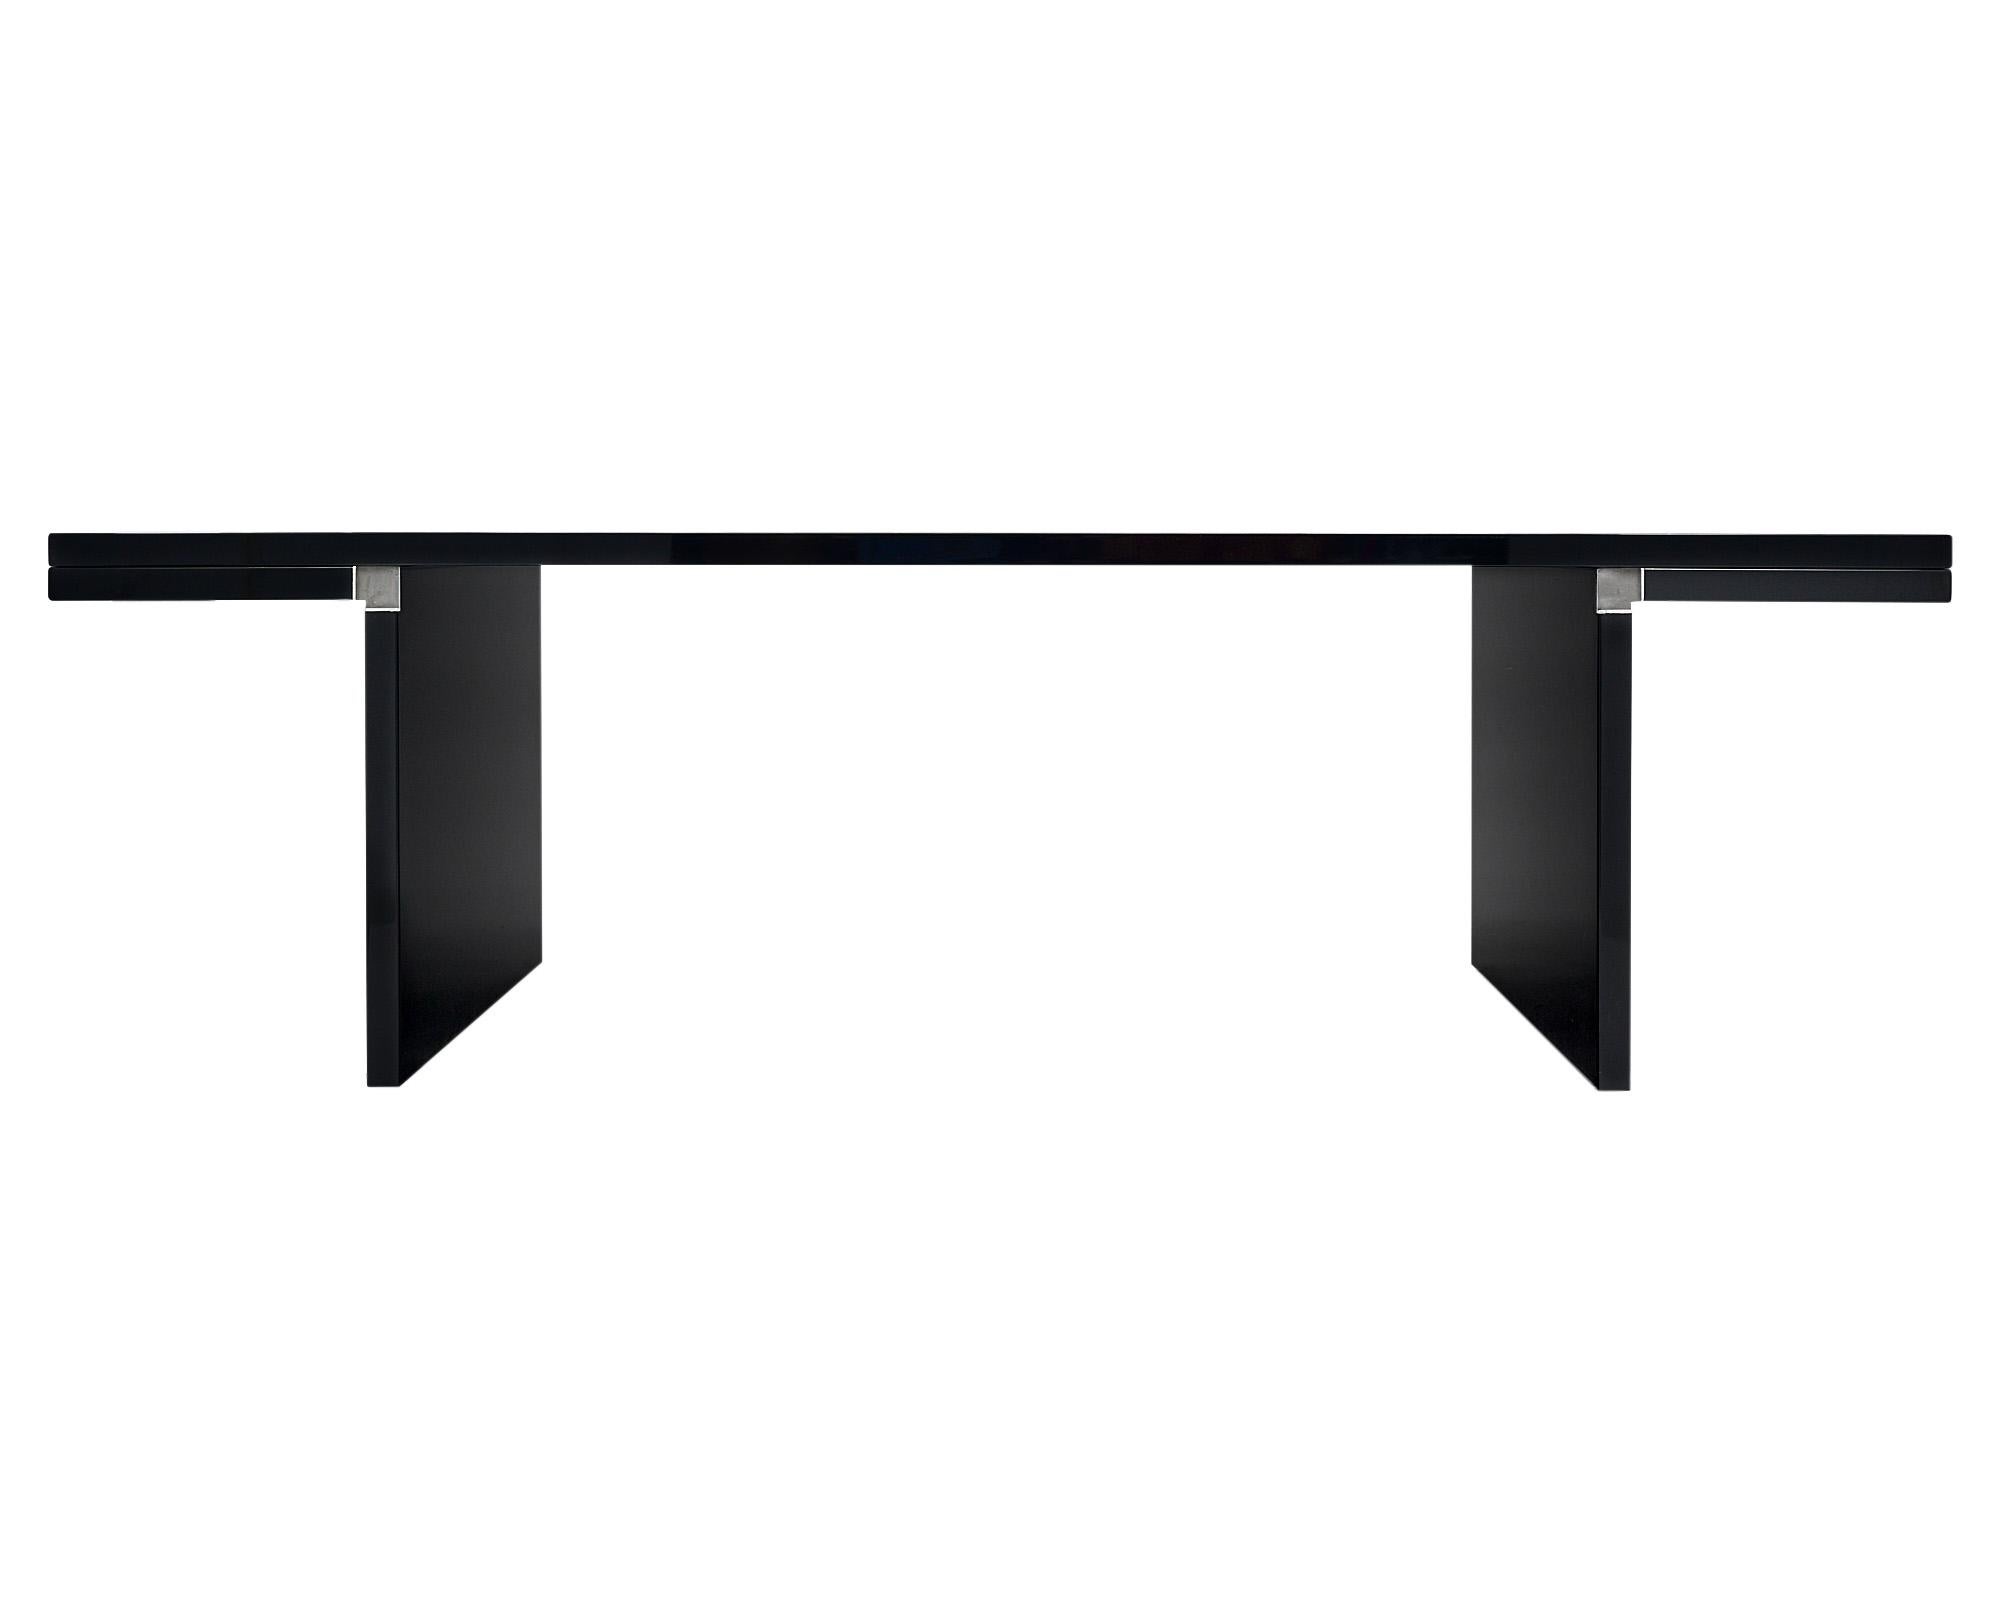 Late 20th Century “Orseleo” table by Carlo Scarpa for Cassina